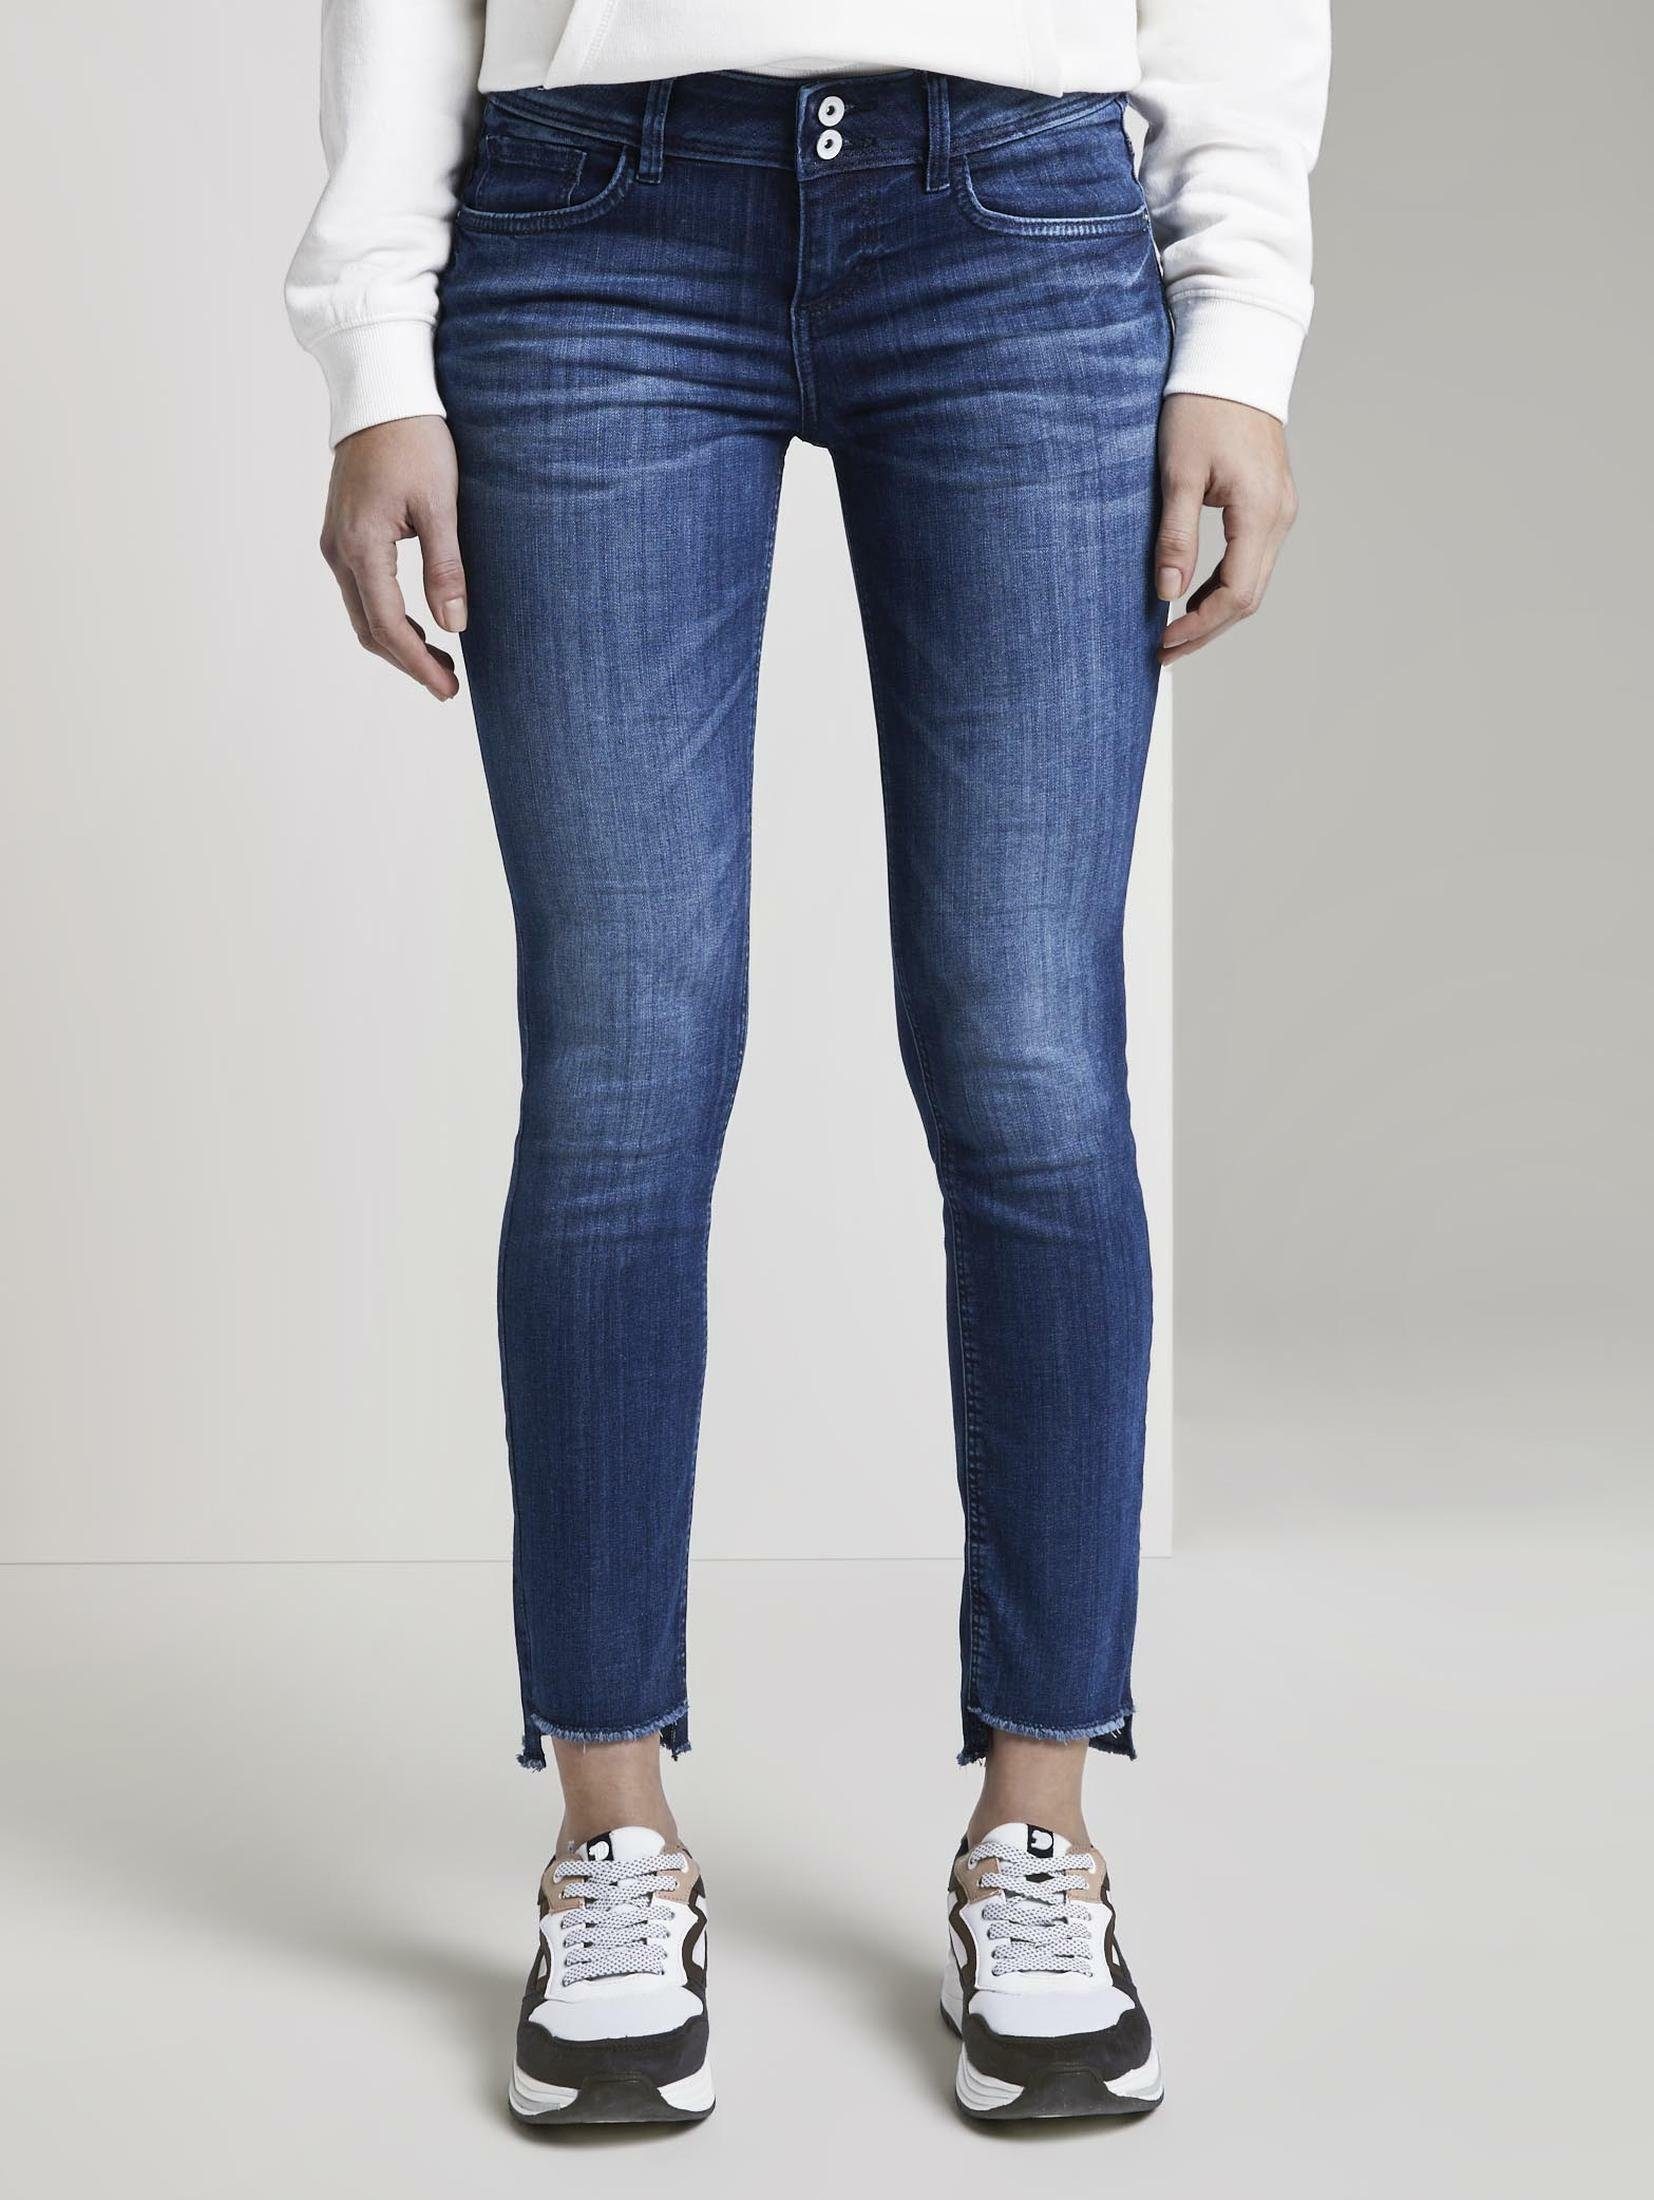 TOM TAILOR Skinny-fit-Jeans online kaufen | OTTO